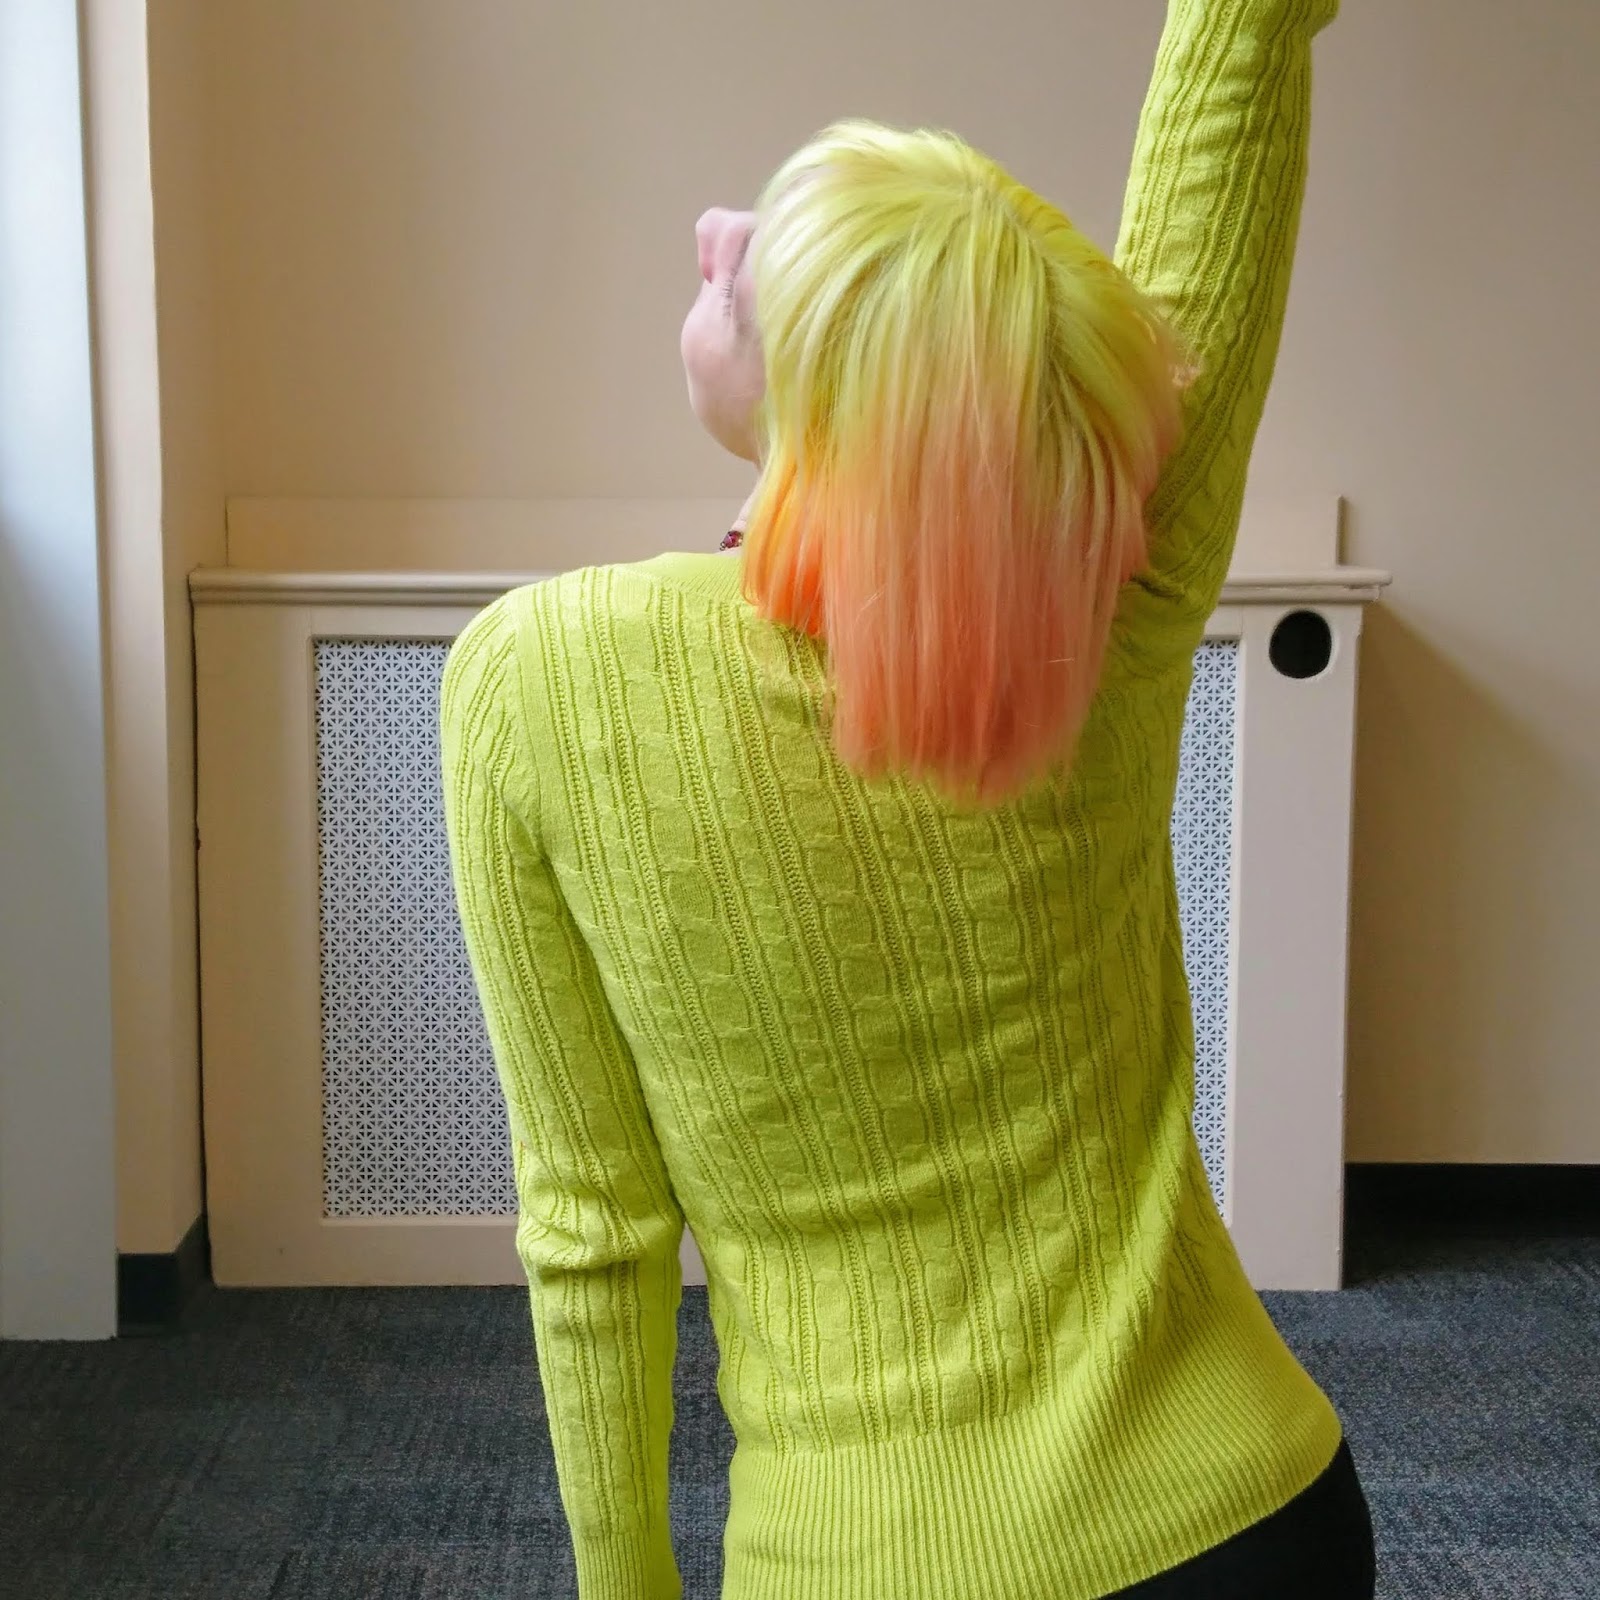 The Unfashionista: How to wear neon yellow hair